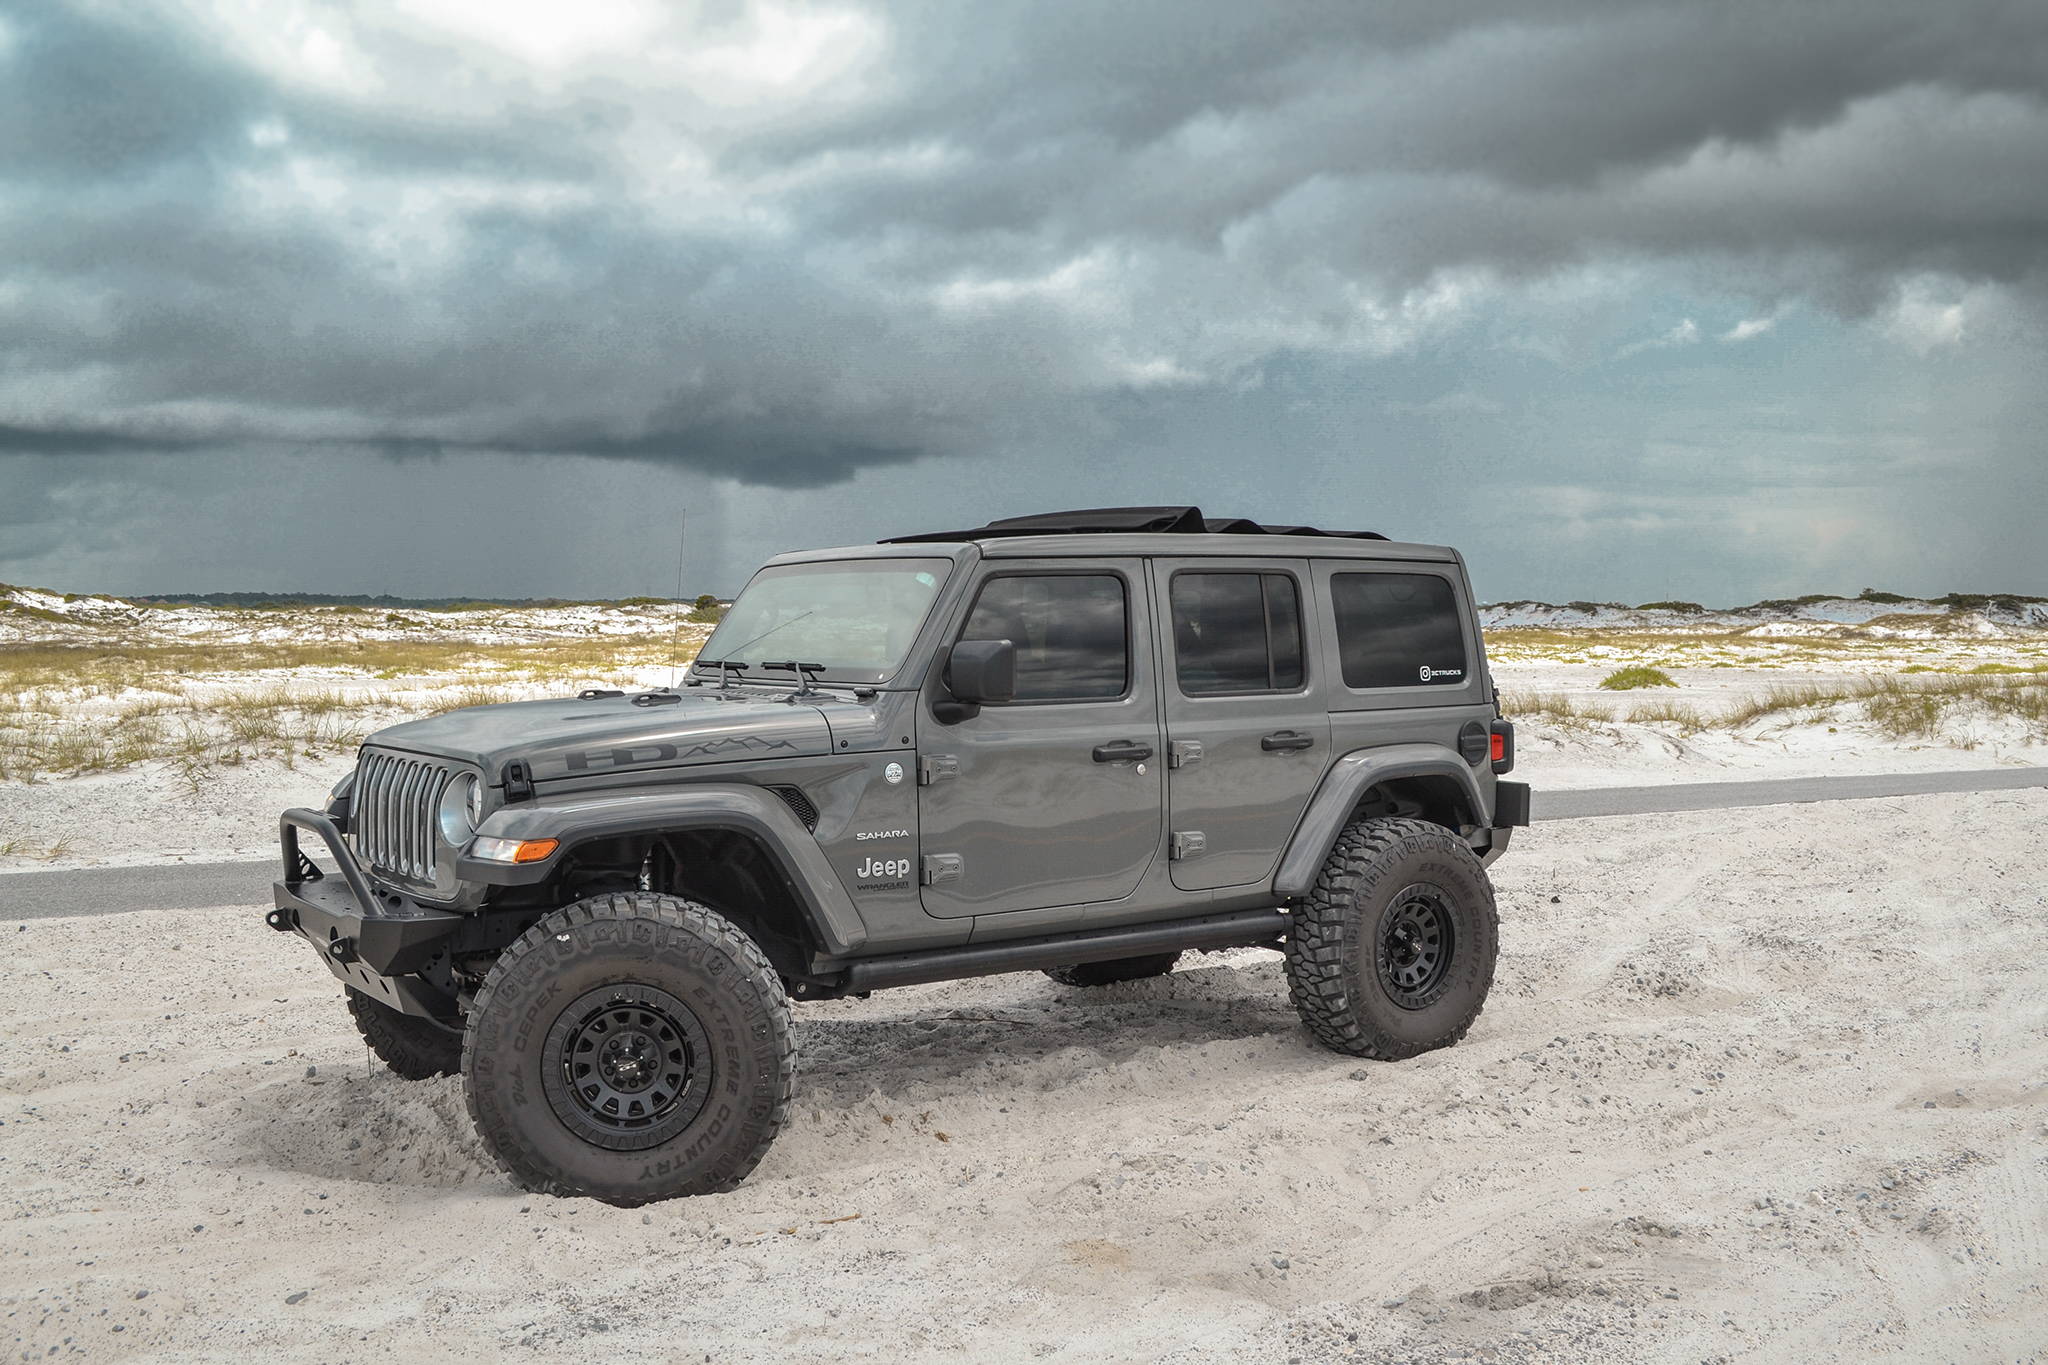 2019 Jeep Wrangler JL Lifted with HD Off-Road Overland Sector Venture Wheels in 17x9.0 All Satin Black